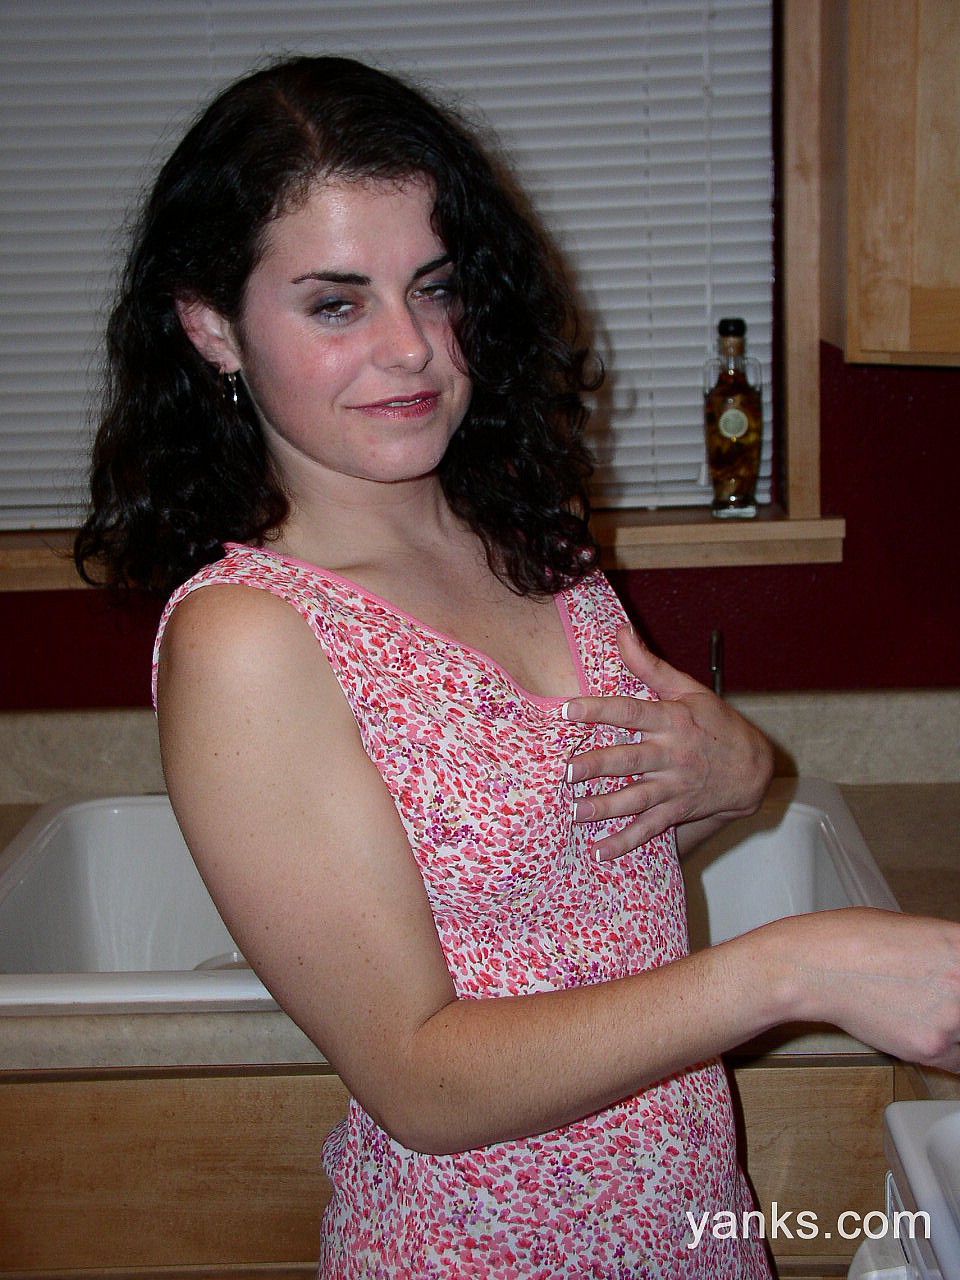 Sexy brunette babe Michelle poses in kitchen and fucks her cunt with carrot foto porno #427200618 | Yanks Pics, Michelle, Amateur, porno móvil